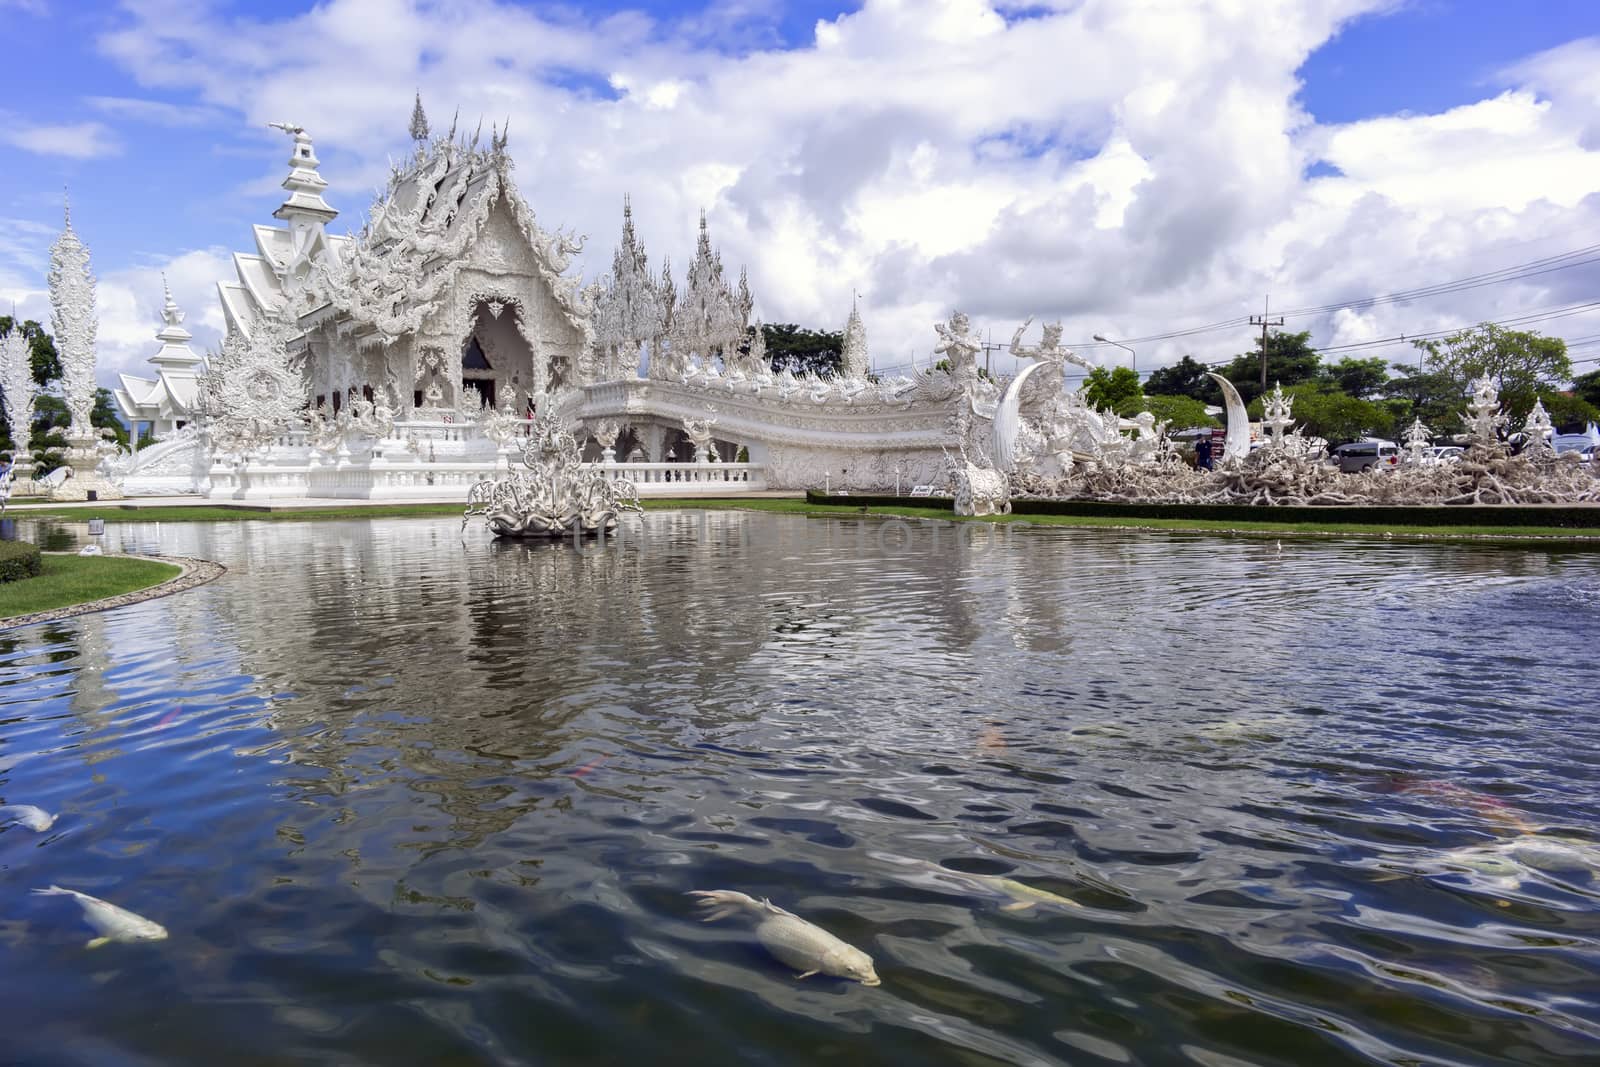 White Temple and Fish. Contemporary unconventional Buddhist temple in Chiang Rai, Thailand.